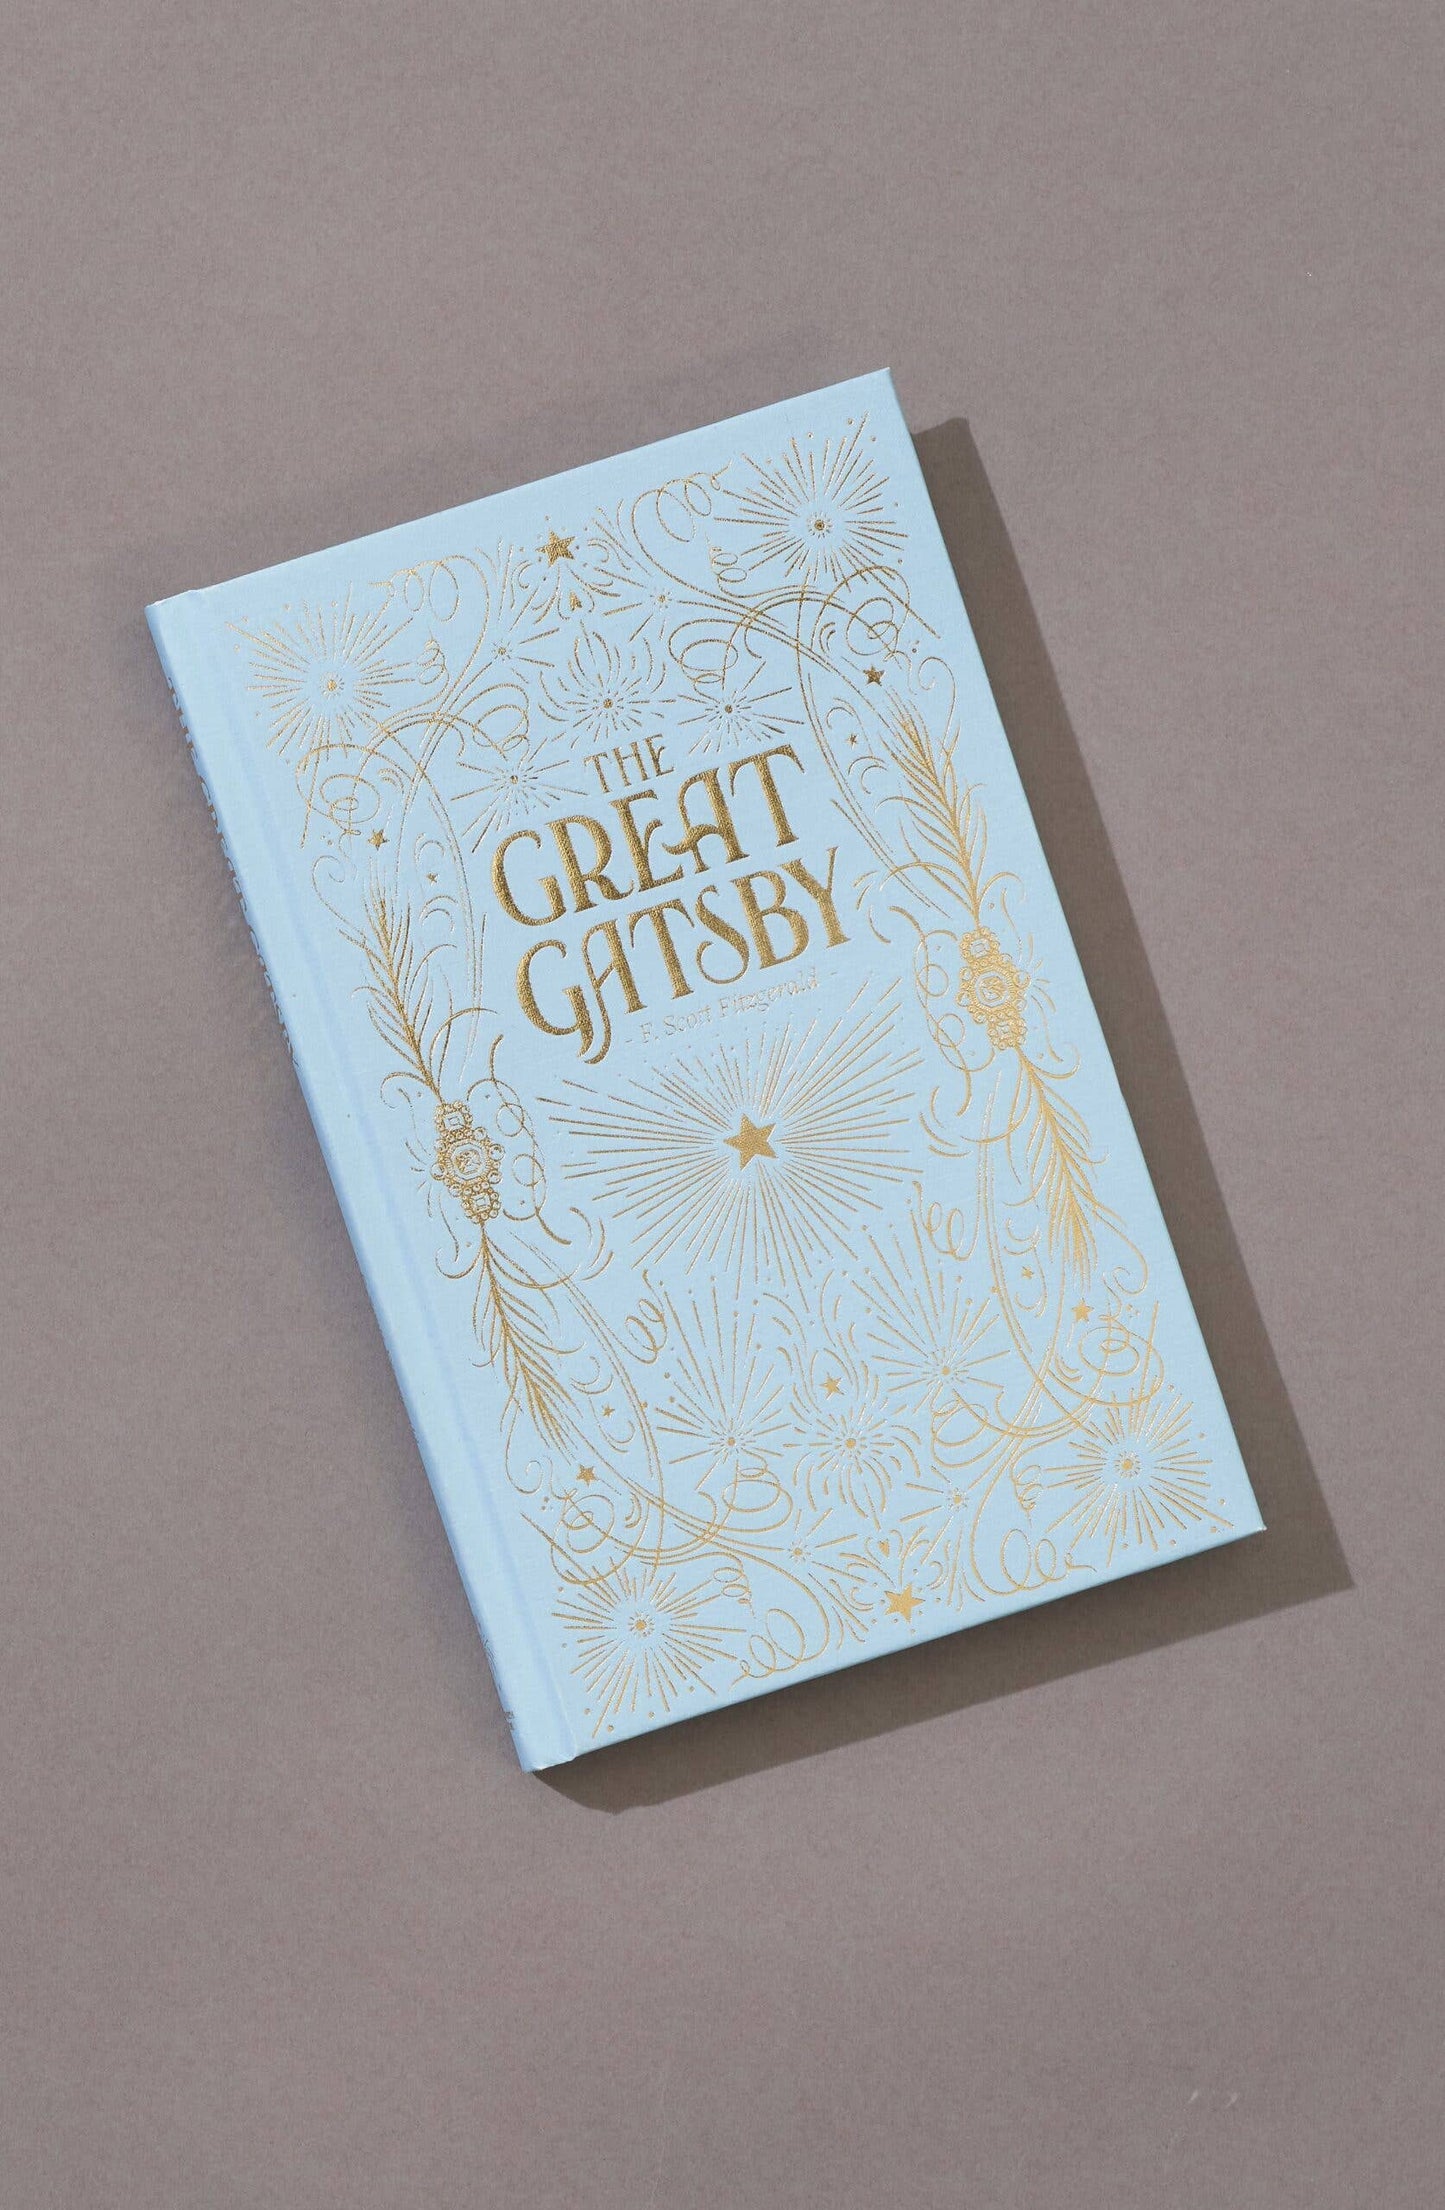 The Great Gatsby | Wordsworth Luxe Edition | Book